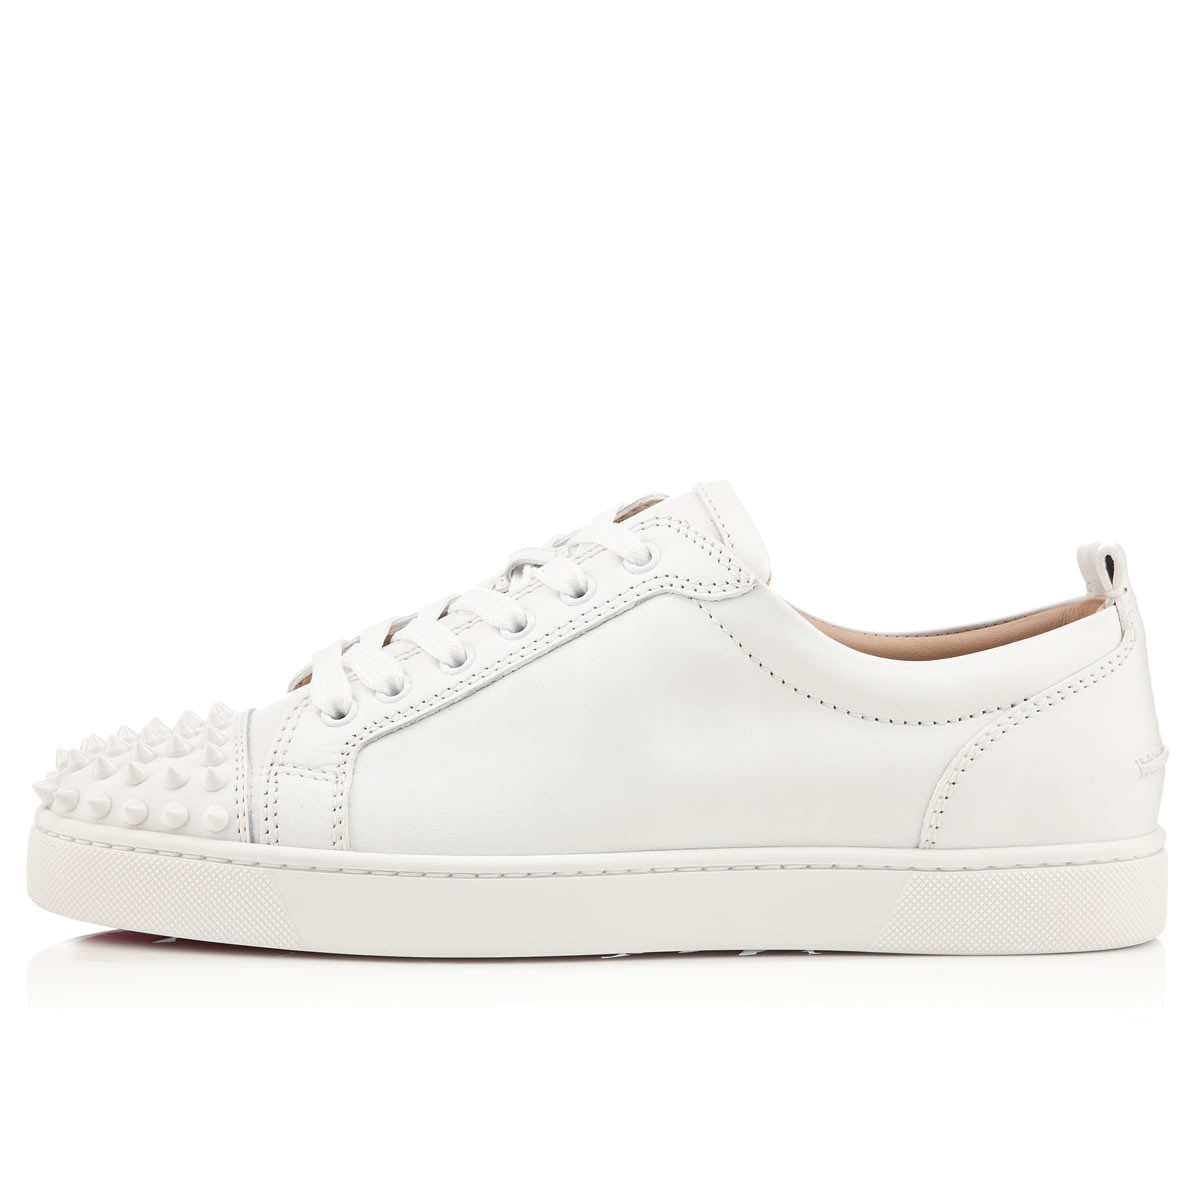 christian louboutin mens sneakers spikes